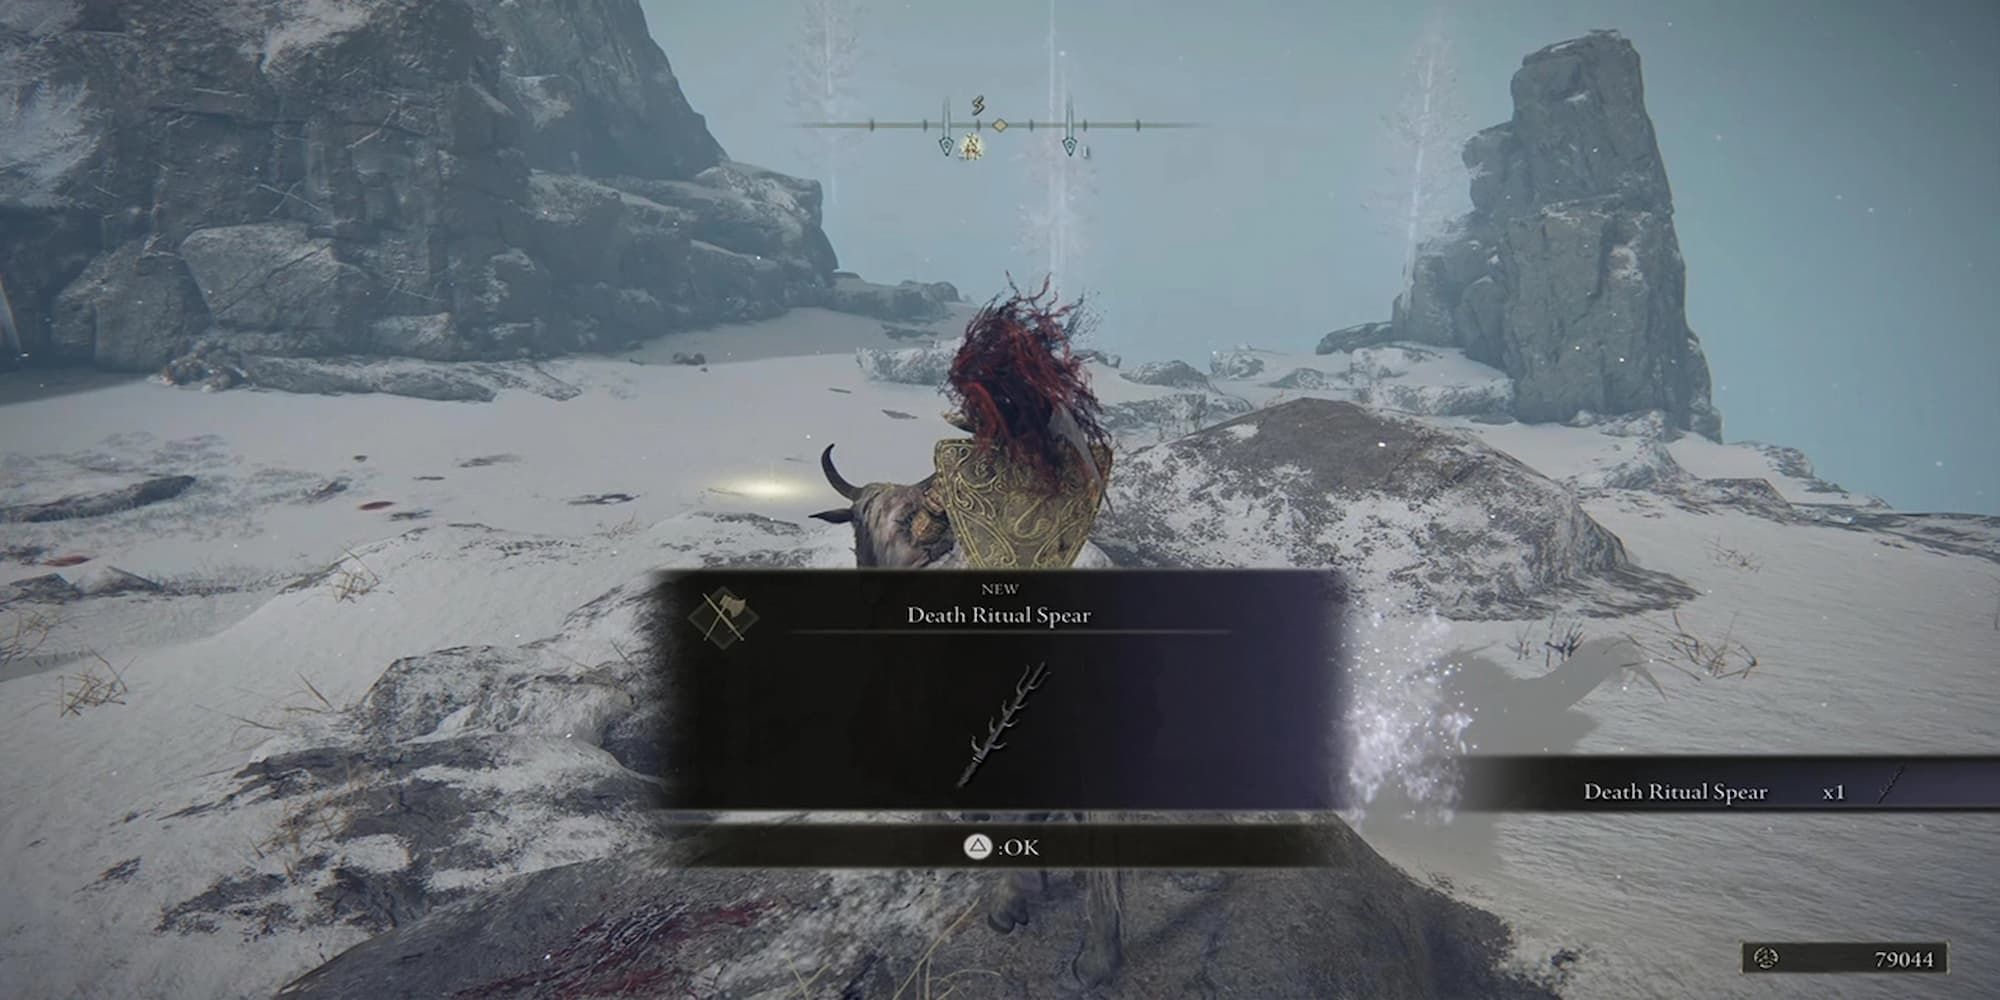 Player Finding The Death Ritual Spear